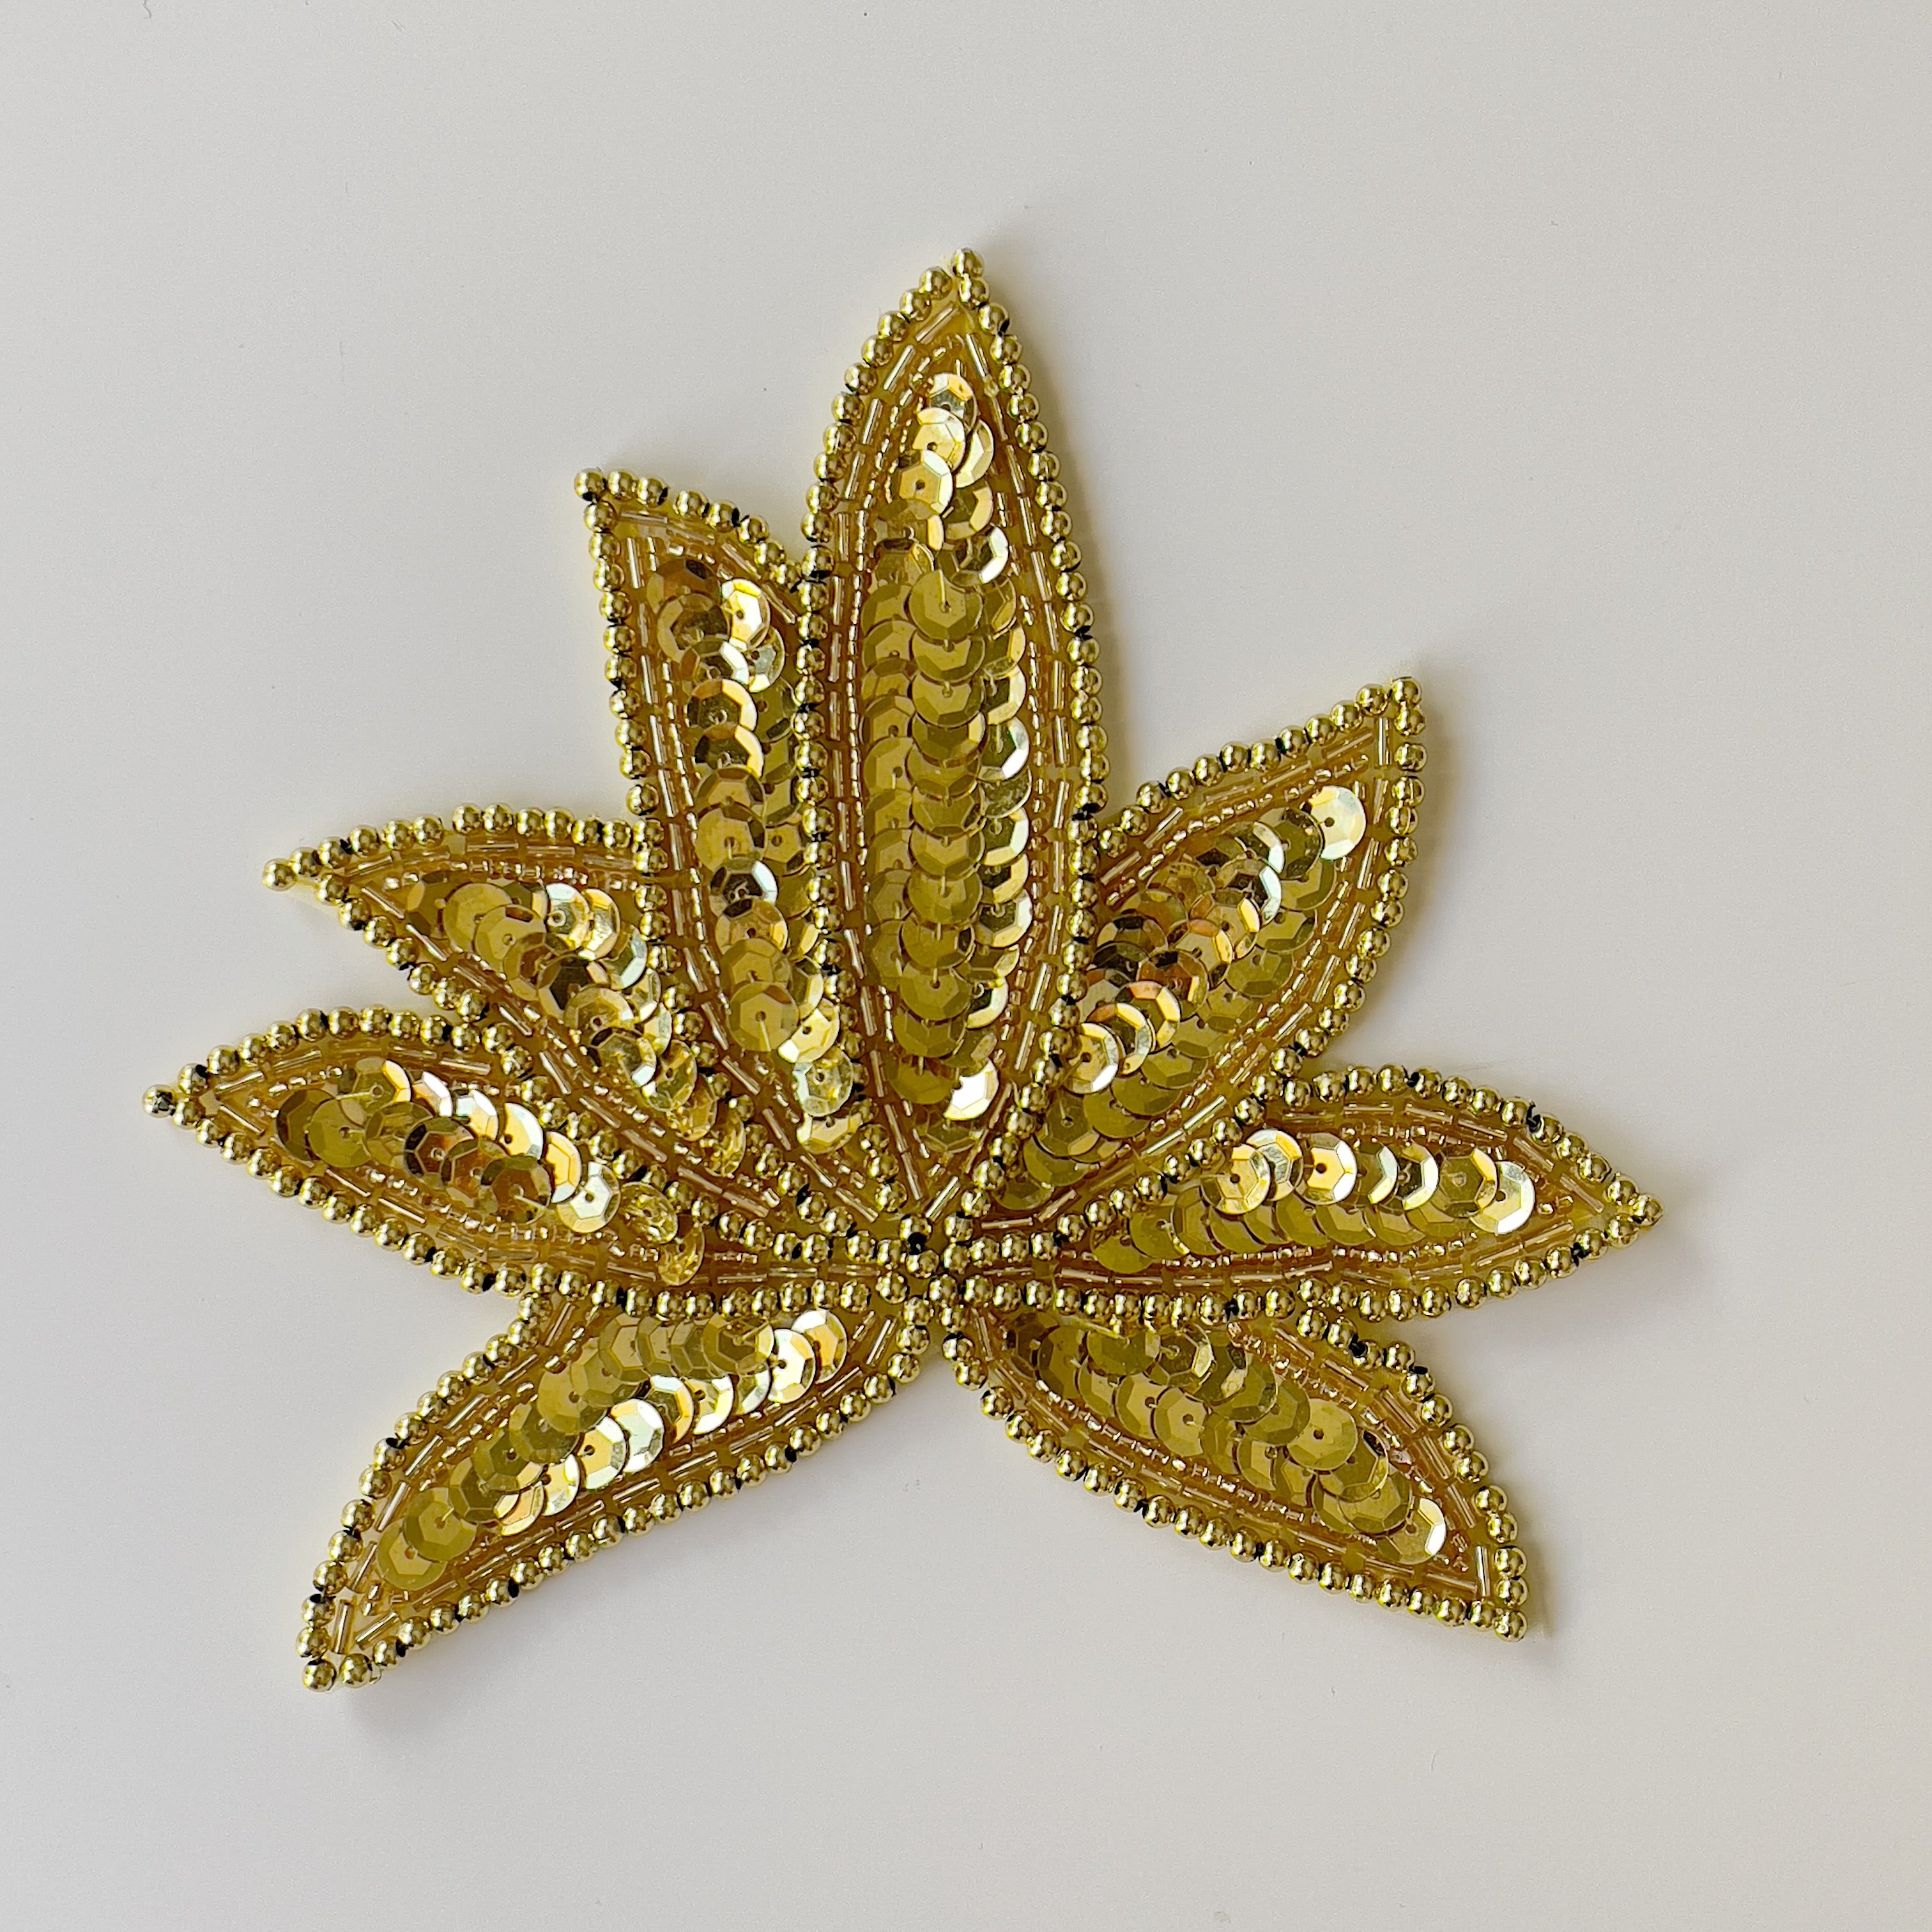 Gold leaf shaped applique.  Leaf shapes are filled with gold sequins and edged with gold beads.